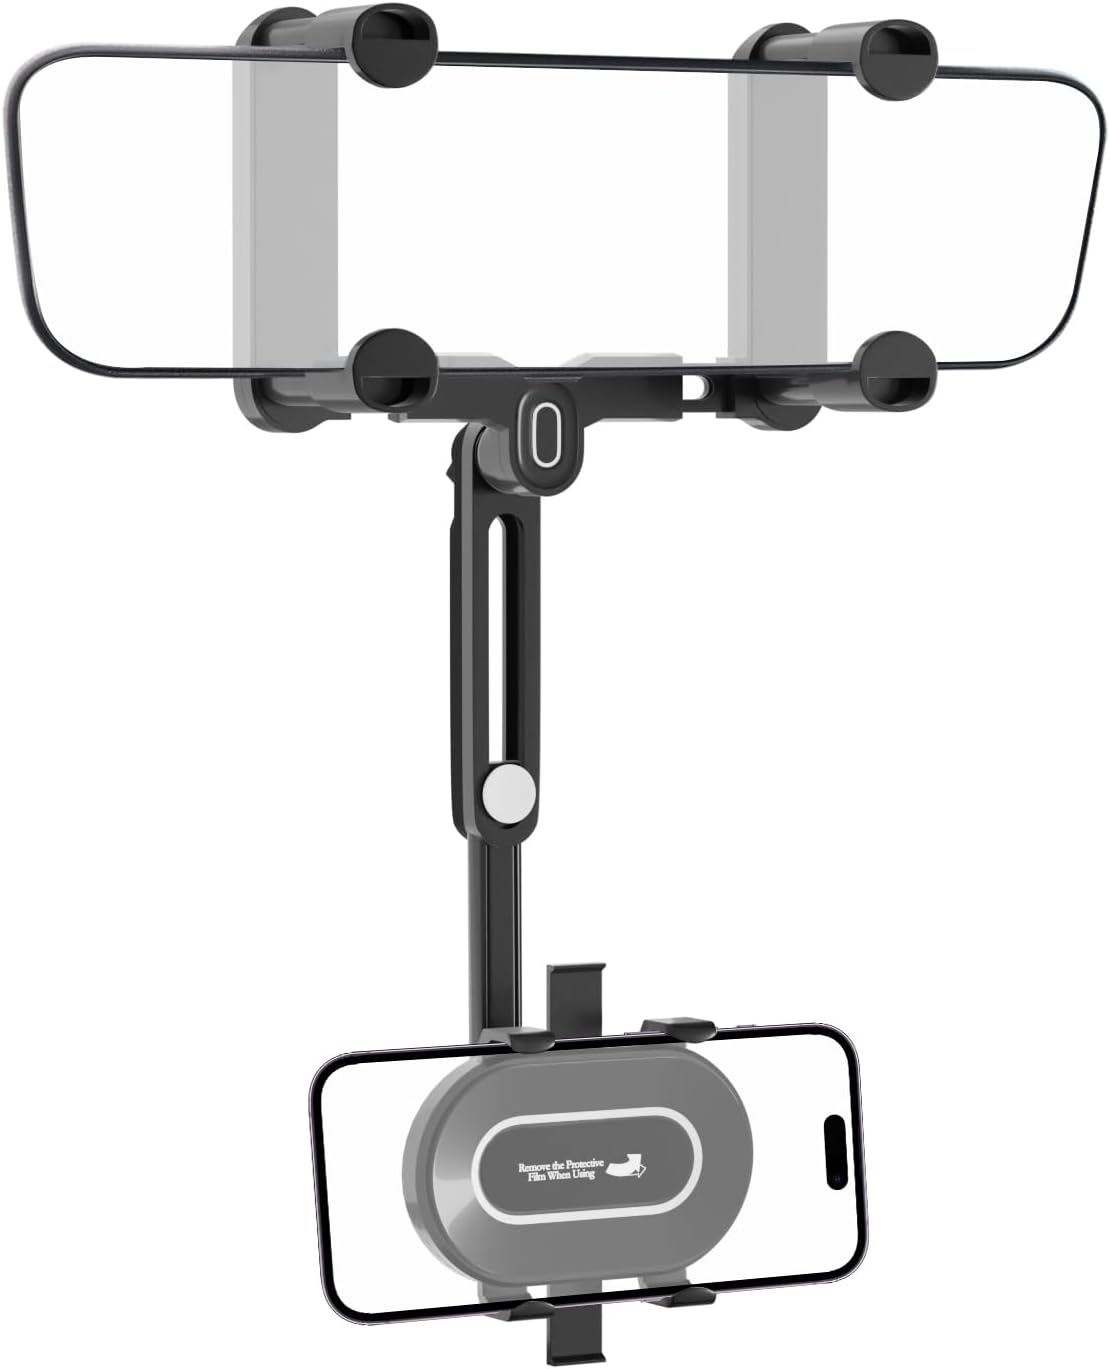 SXhyf New Rear View Mirror Phone Holder